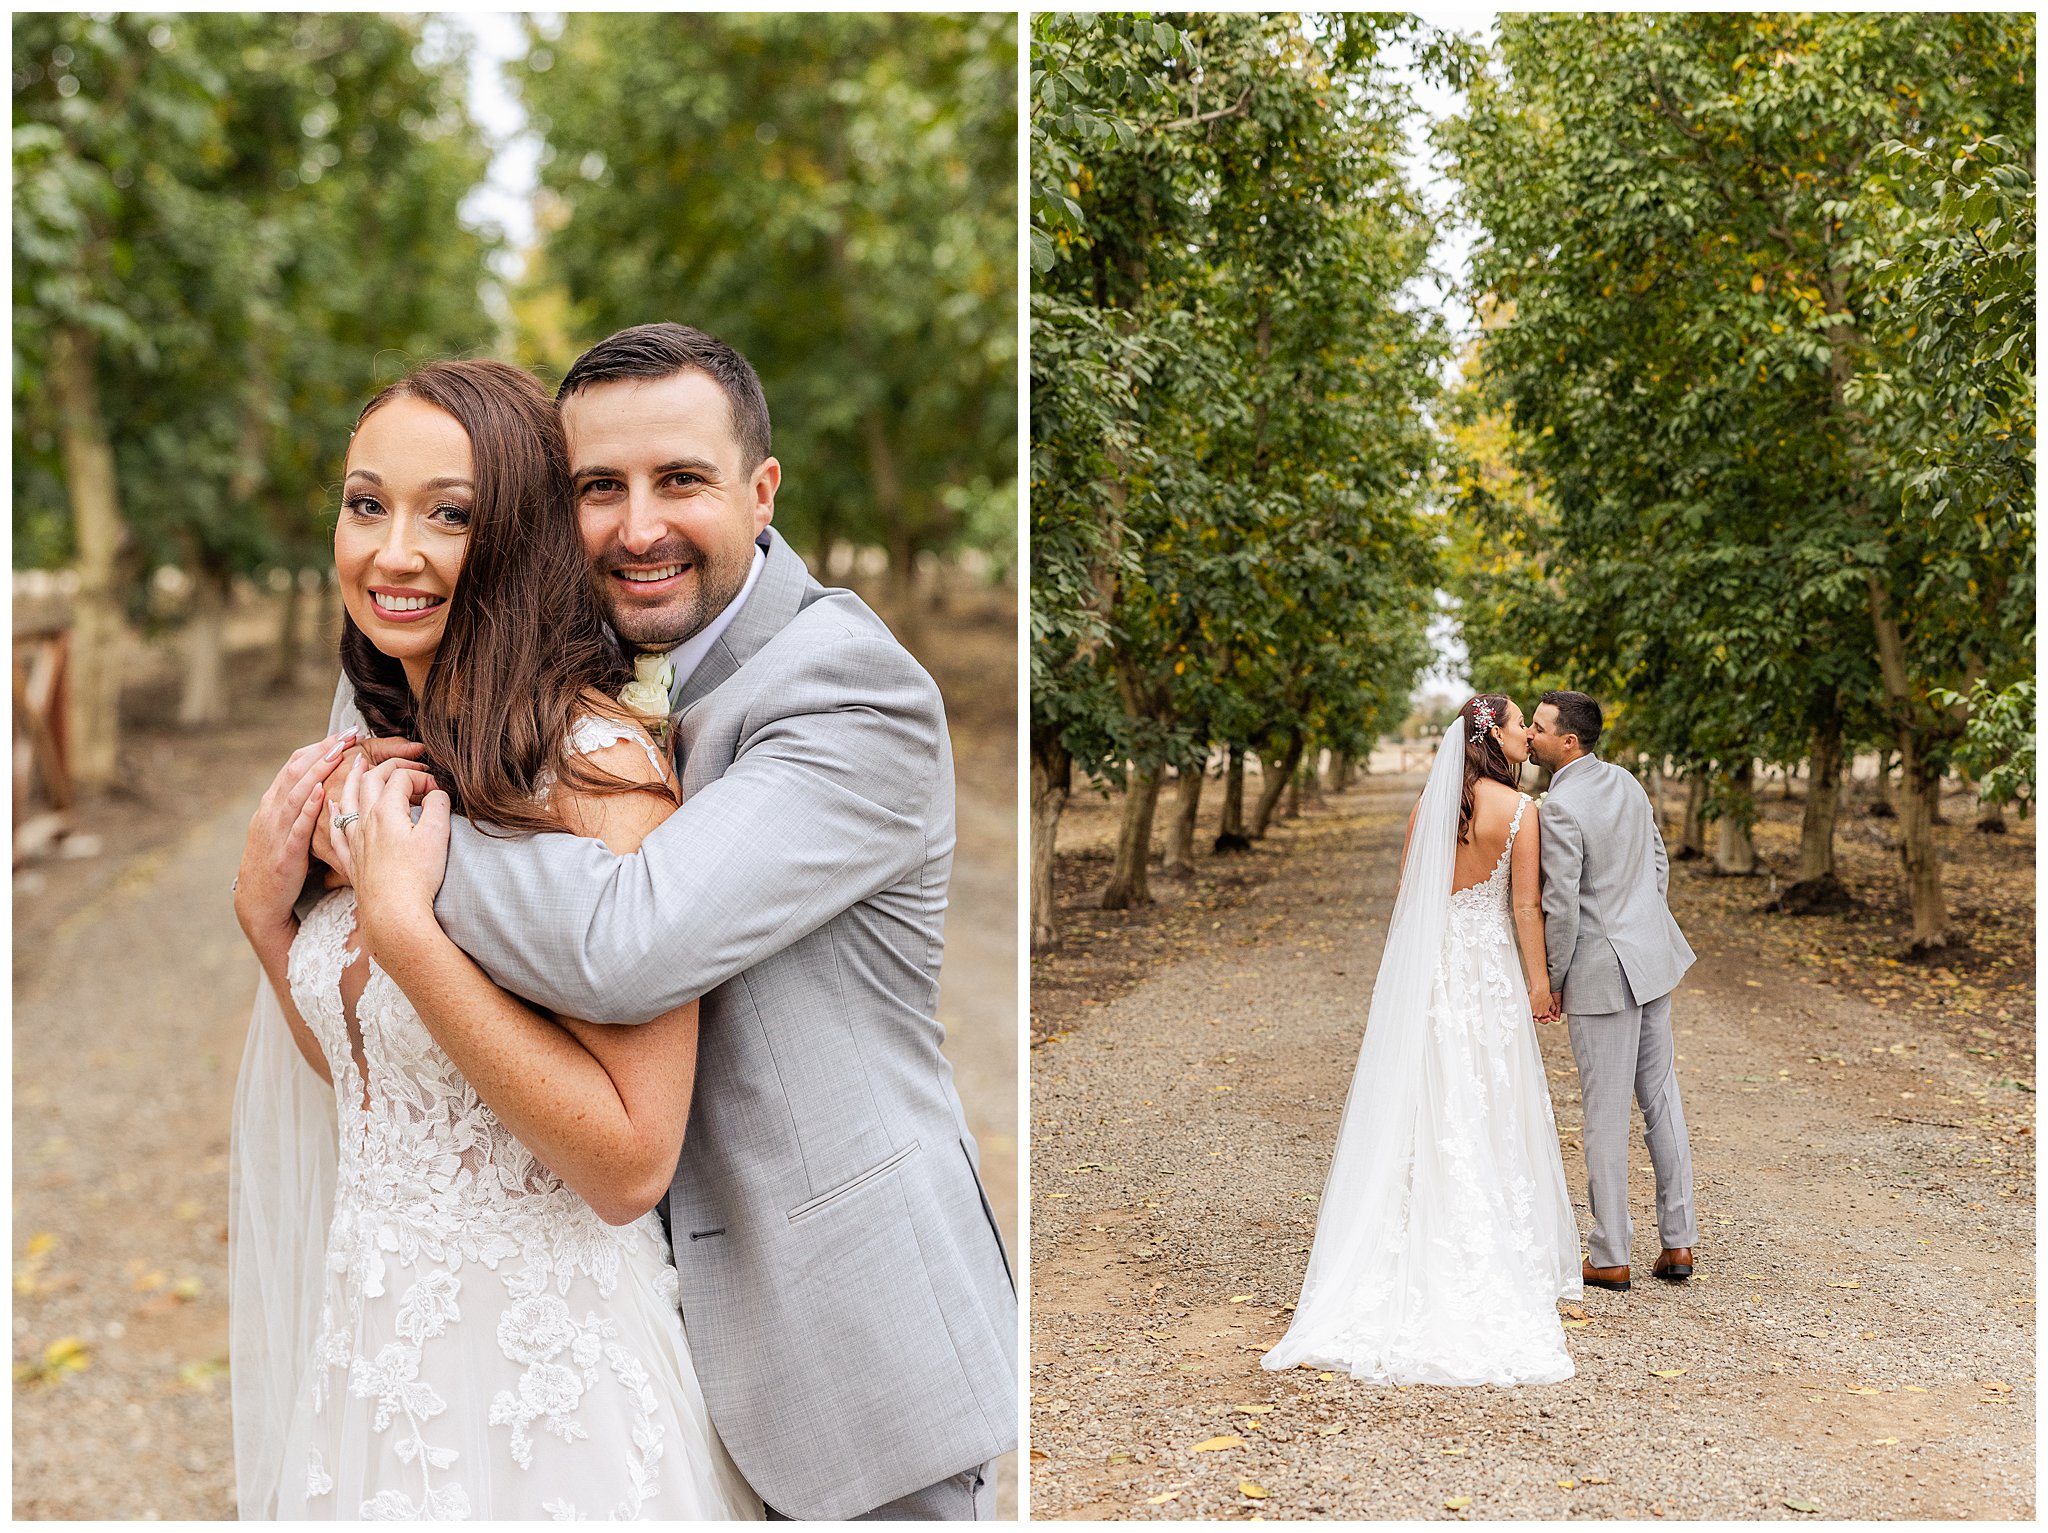 The Barn Pheasant Trail Ranch Wedding Chico CA First Look White Barn Walnut Orchard Bridal Party Ceremony Floral Floor Arch November Fall,